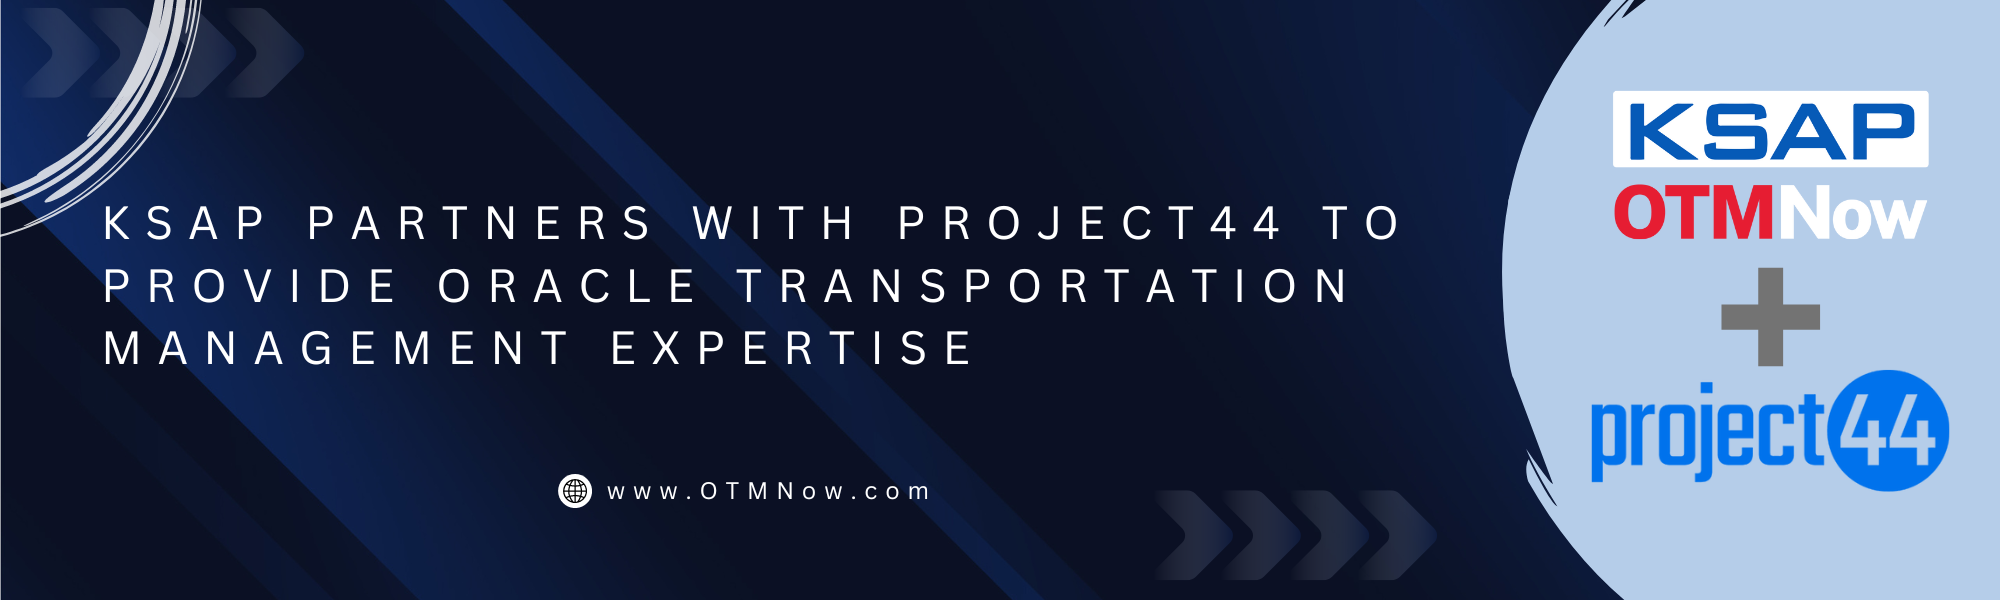 KSAP Partners with project44 to Provide Oracle Transportation Management Expertise